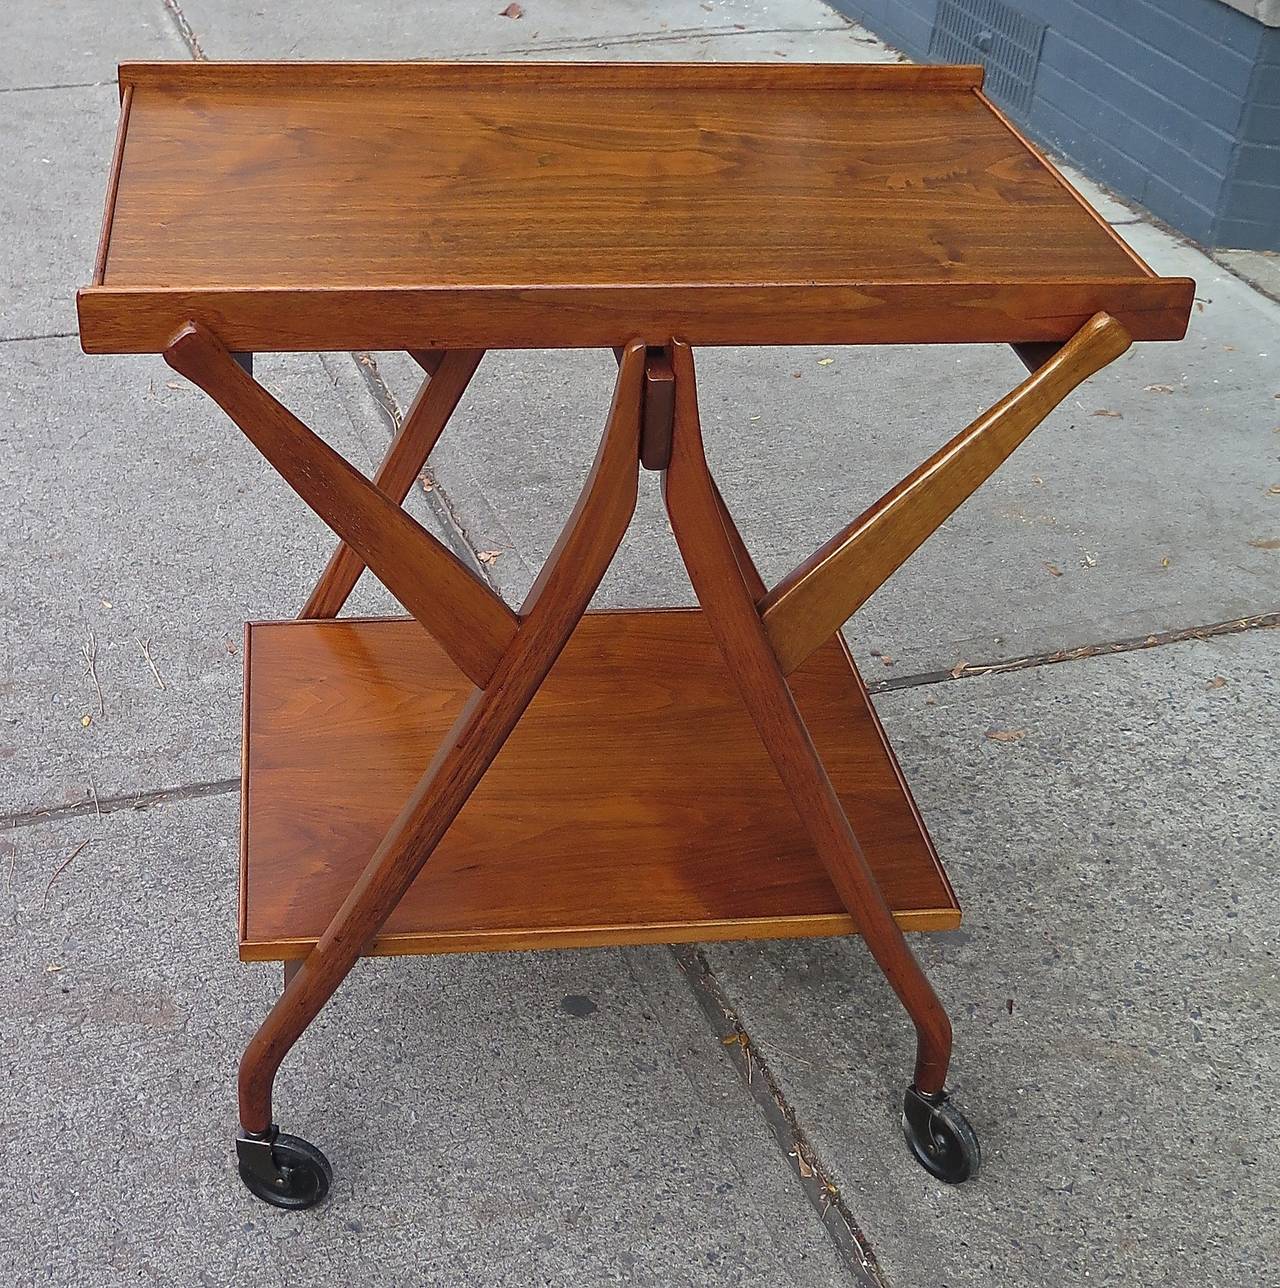 Declaration Series. Restored. Removable top tray. Walnut, reddish-brown color. Plastic wheels good condition. Some scuffing on tray under new lacquer.